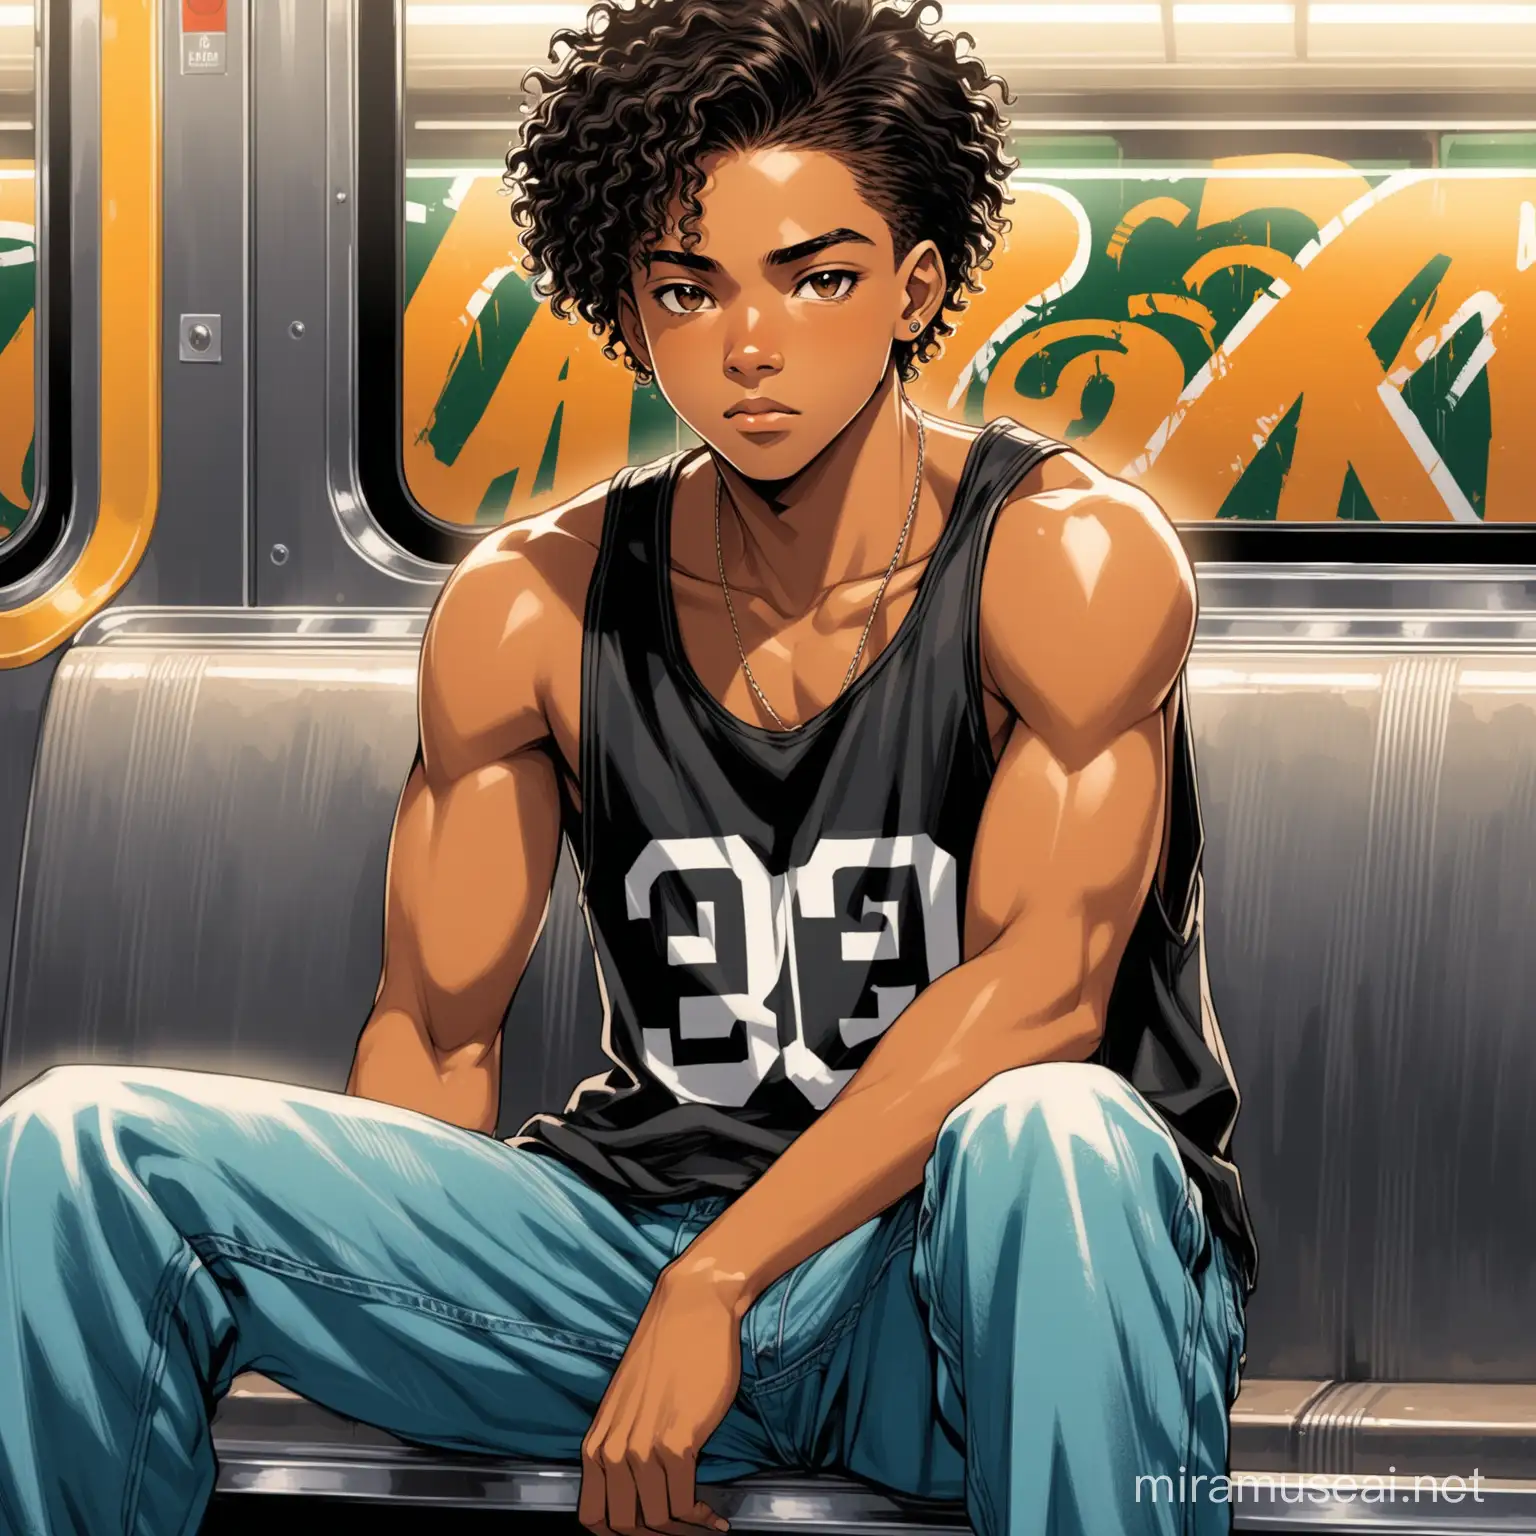 VERY DETAILED AND GOOD QUALITY, amazing, 4k, super cinematic style. A handsome African American/Mulatto teenager, in semi-realism art-style male in almost semi-anime-like, early twenties, with typical 1990s clothes. Oversized clothes, a black tank top, baggy jeans, brown eyes, short curly black hair. Sitting, half-body view, subway with graffiti 1990s New York.